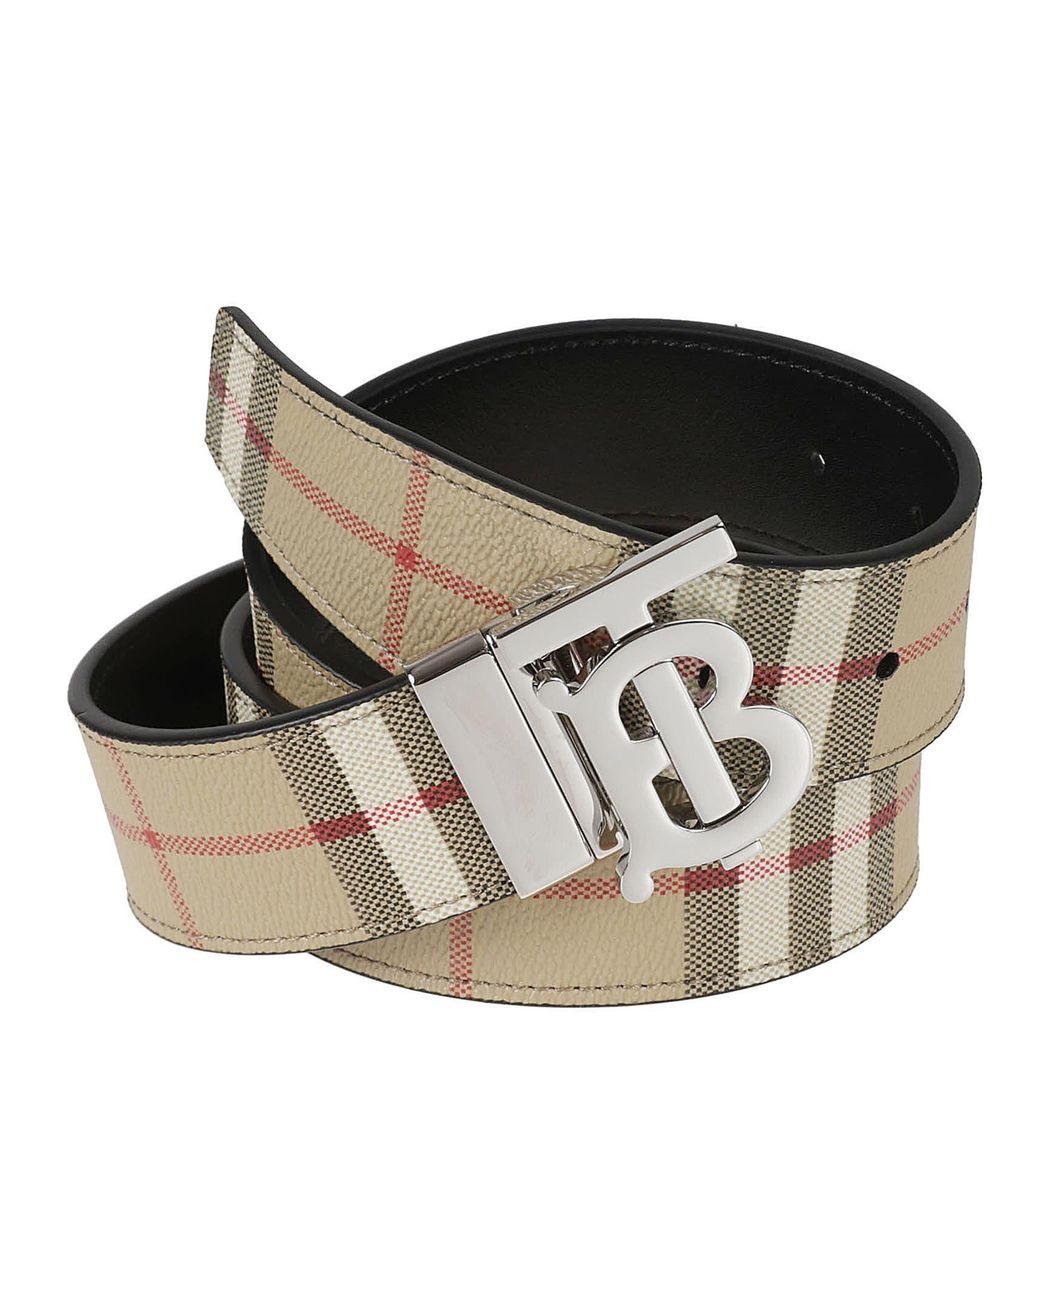 Burberry Check and Leather Reversible TB Belt , Size: M